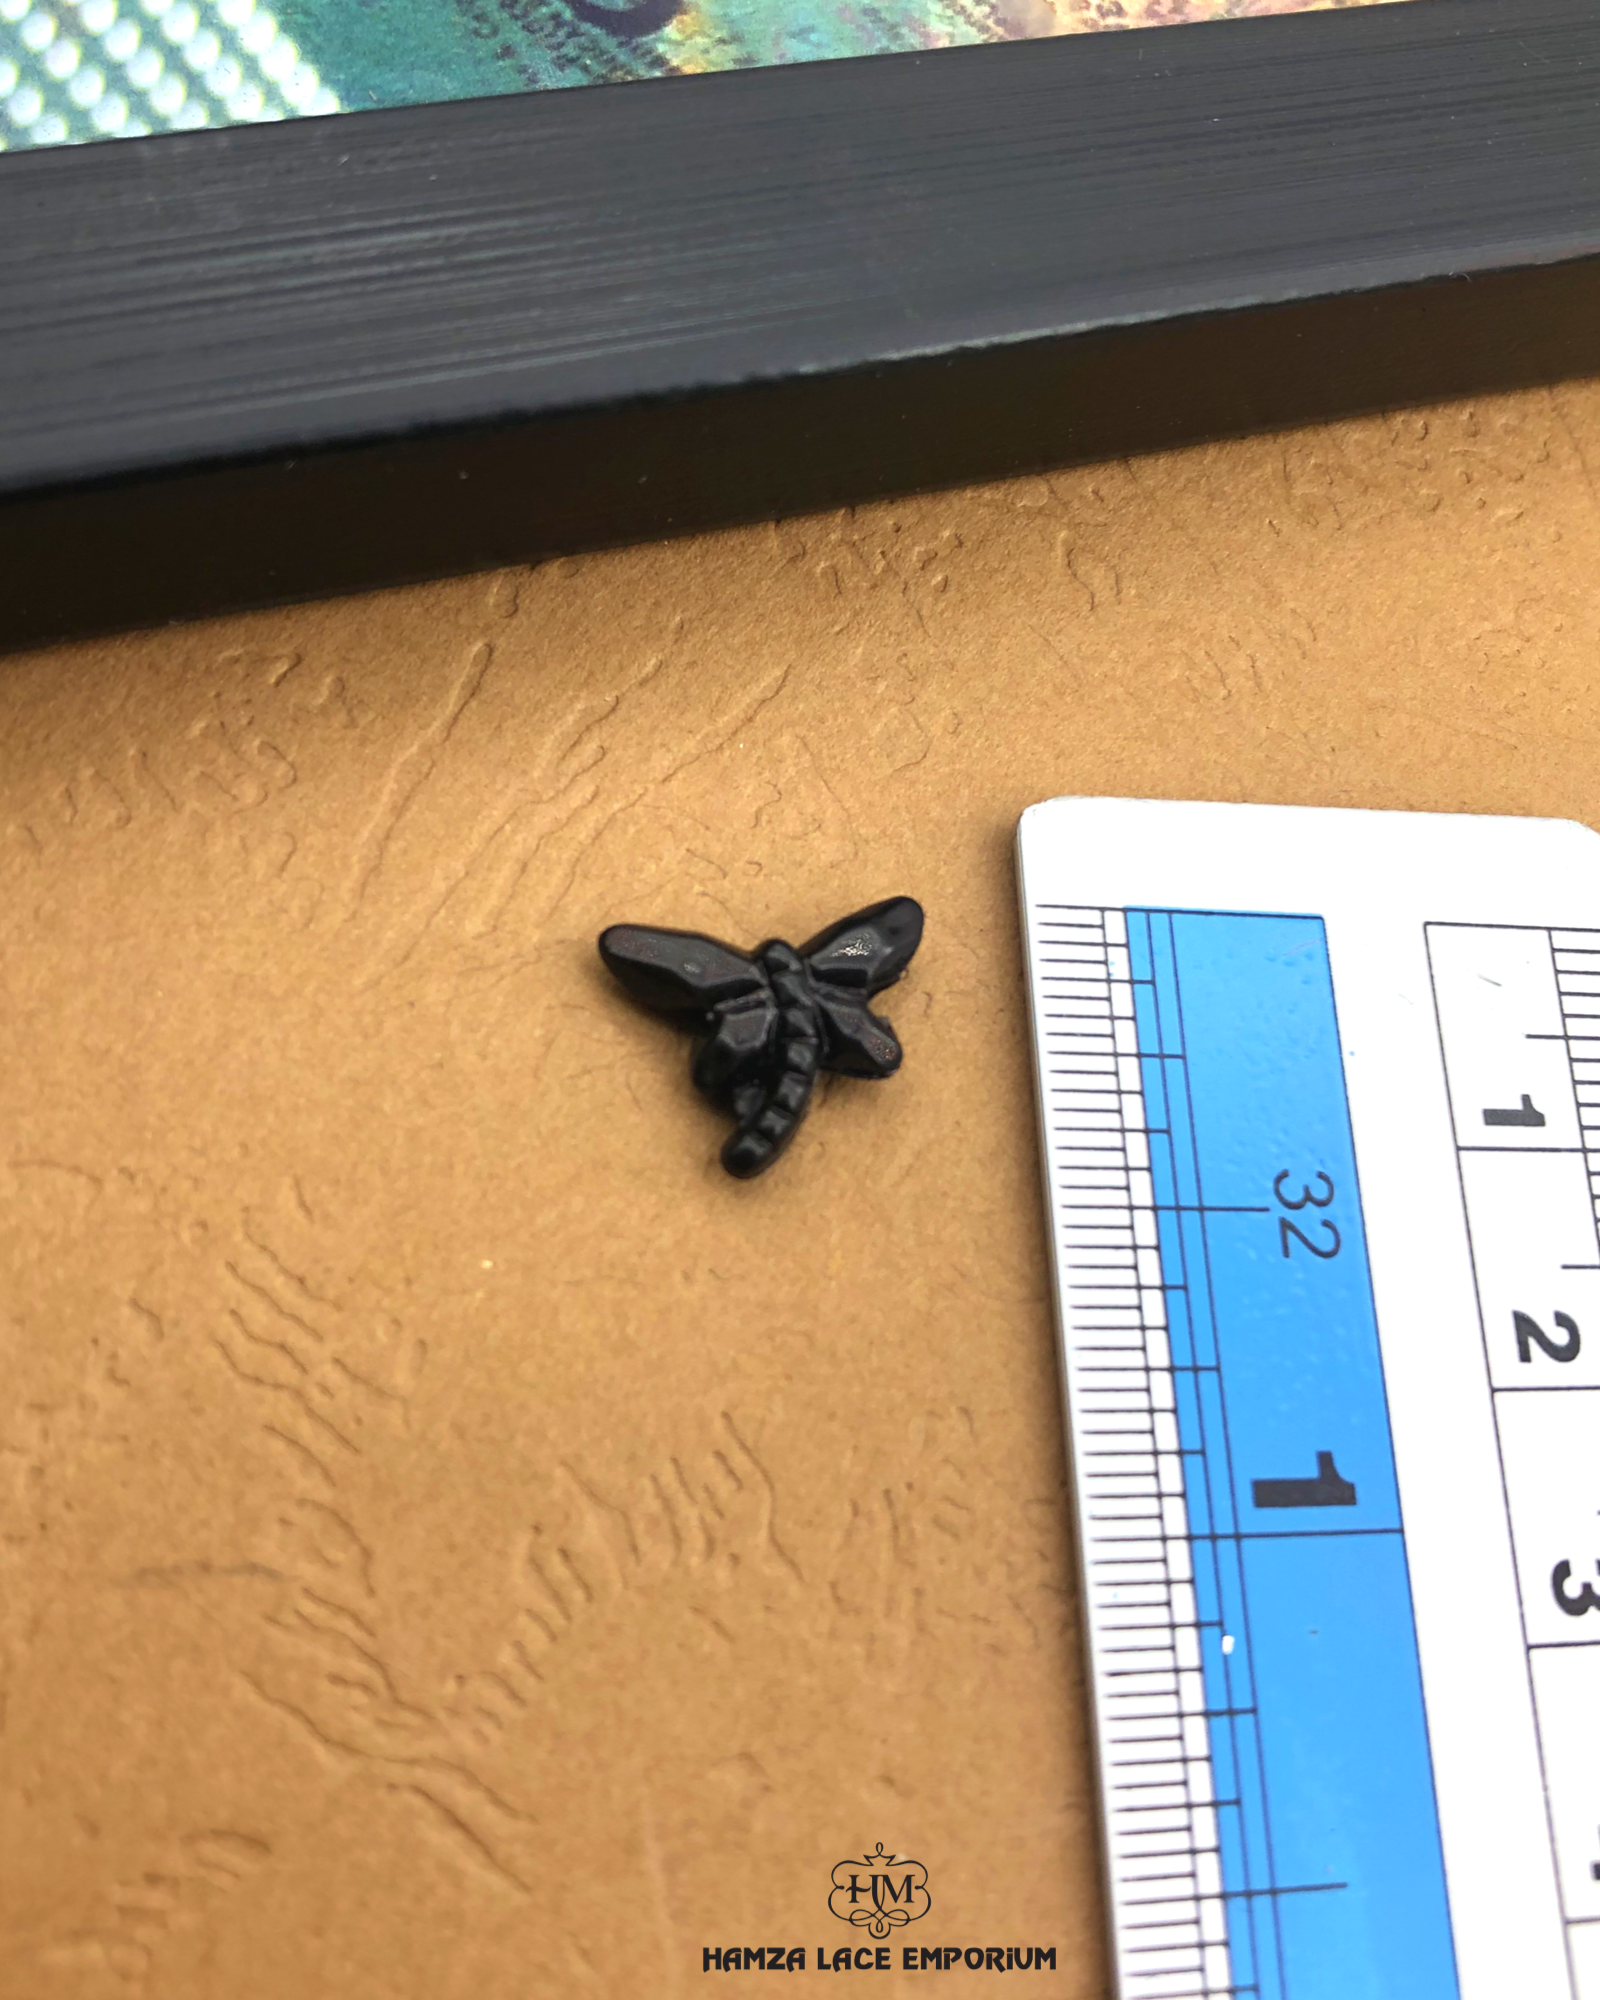 The size of the Beautifully designed 'Butterfly Shape Plastic Accessory PB117' is measured by using a ruler